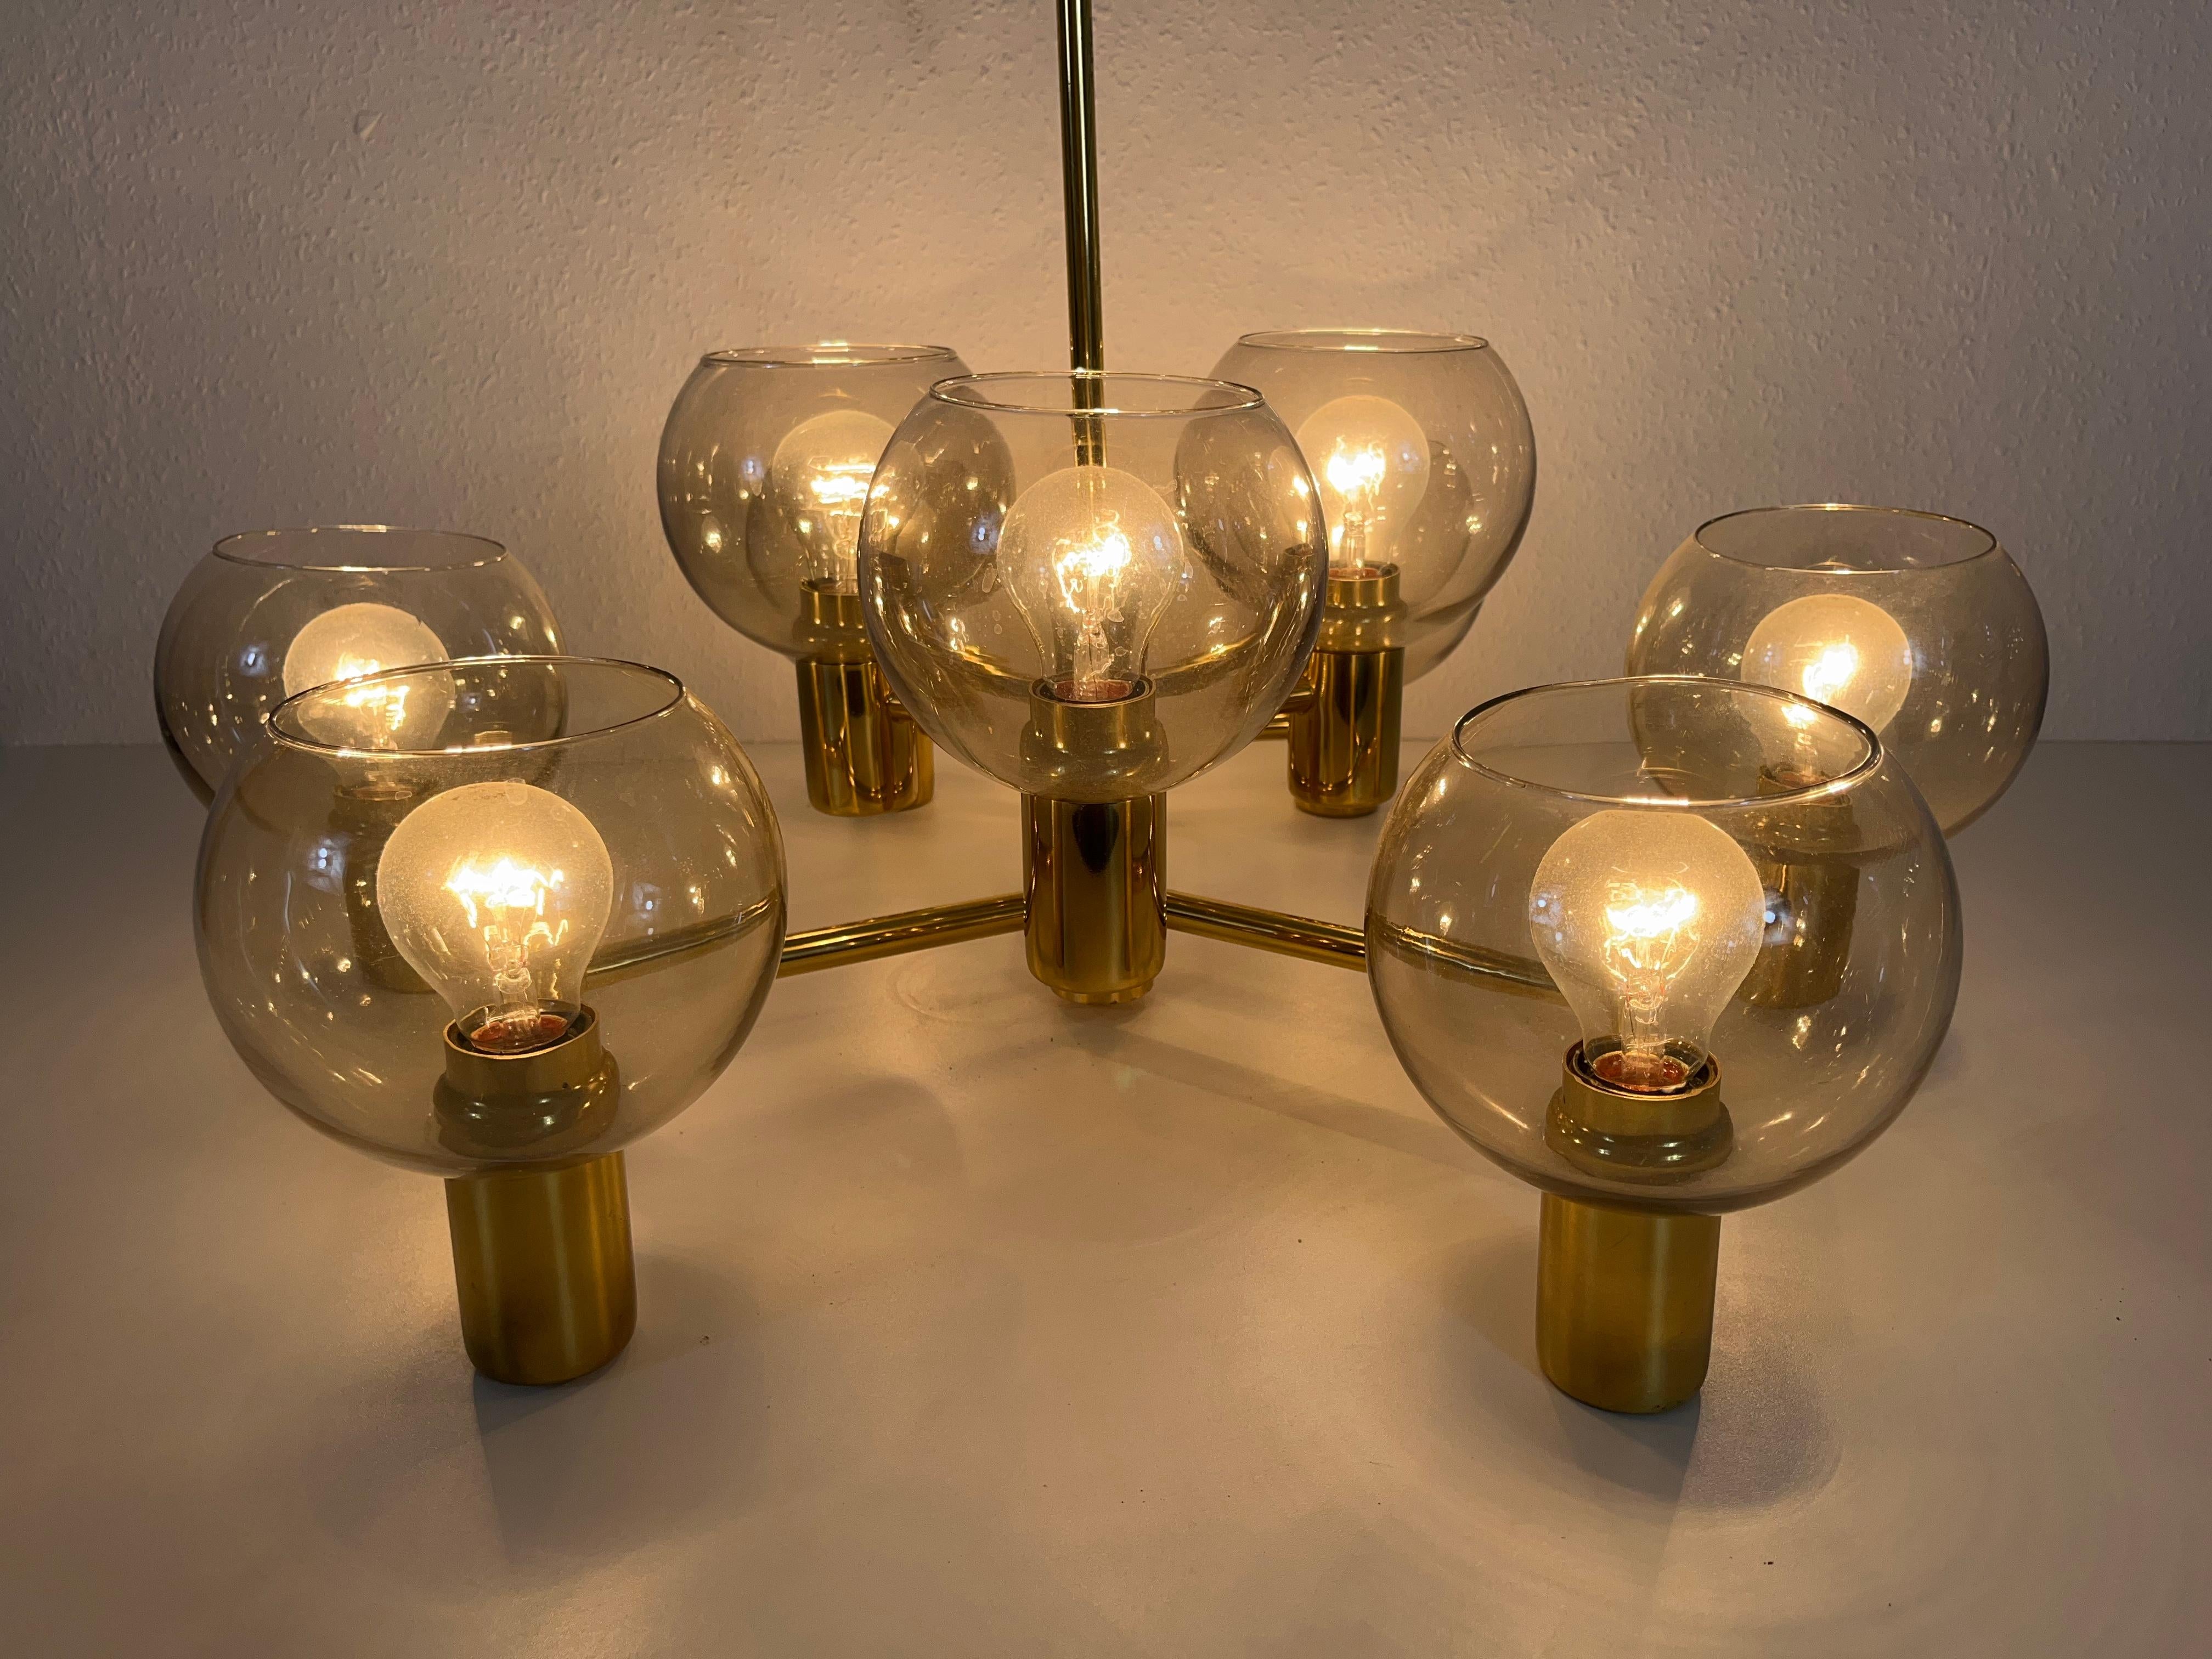 Monumental Swedish Mid-Century Modern Brass and Glass Chandelier, 1960s For Sale 5